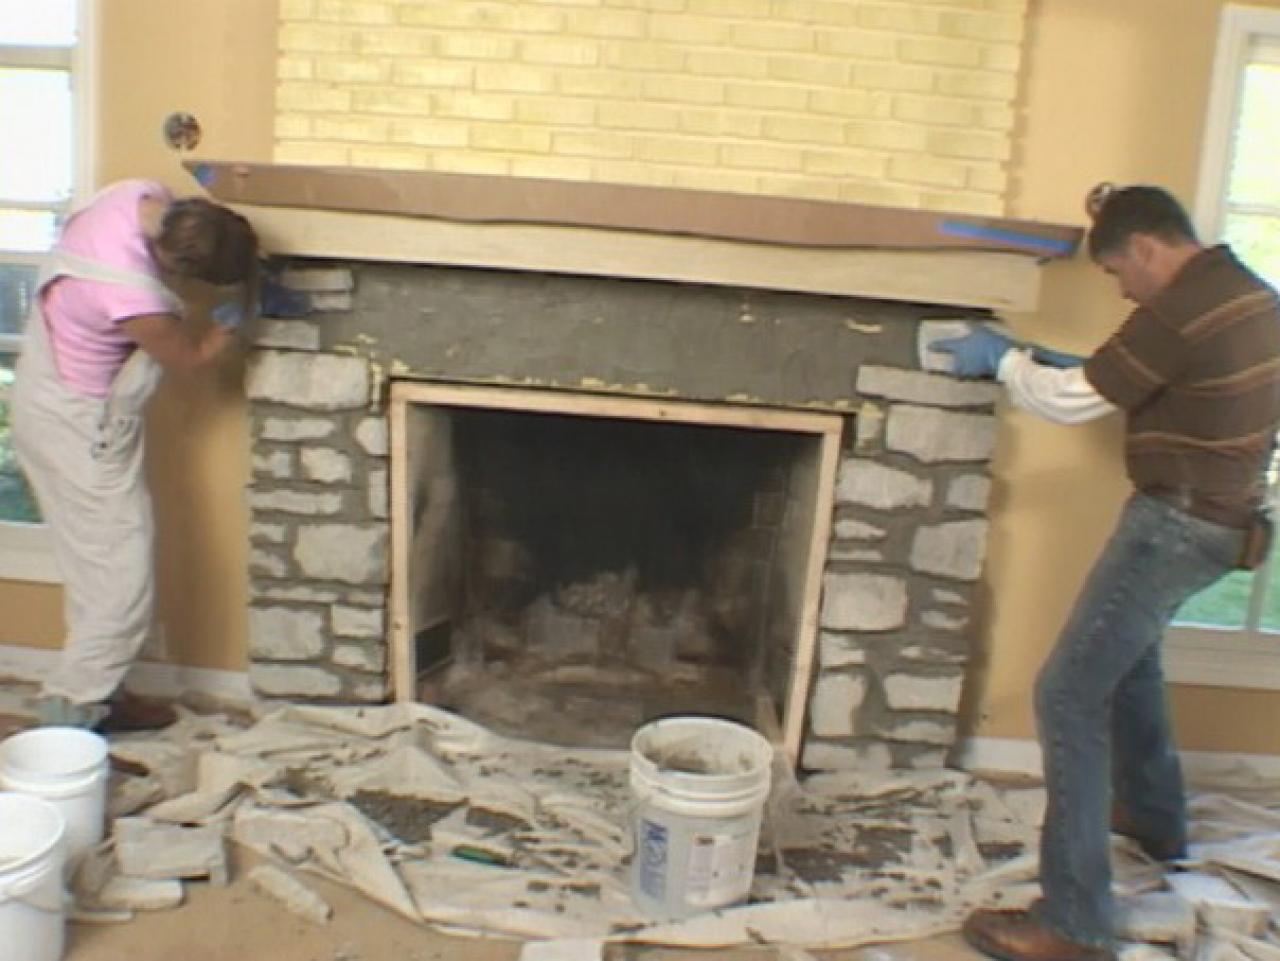 A Fireplace Mantel And Add Stone Veneer, Building A Natural Stone Fireplace